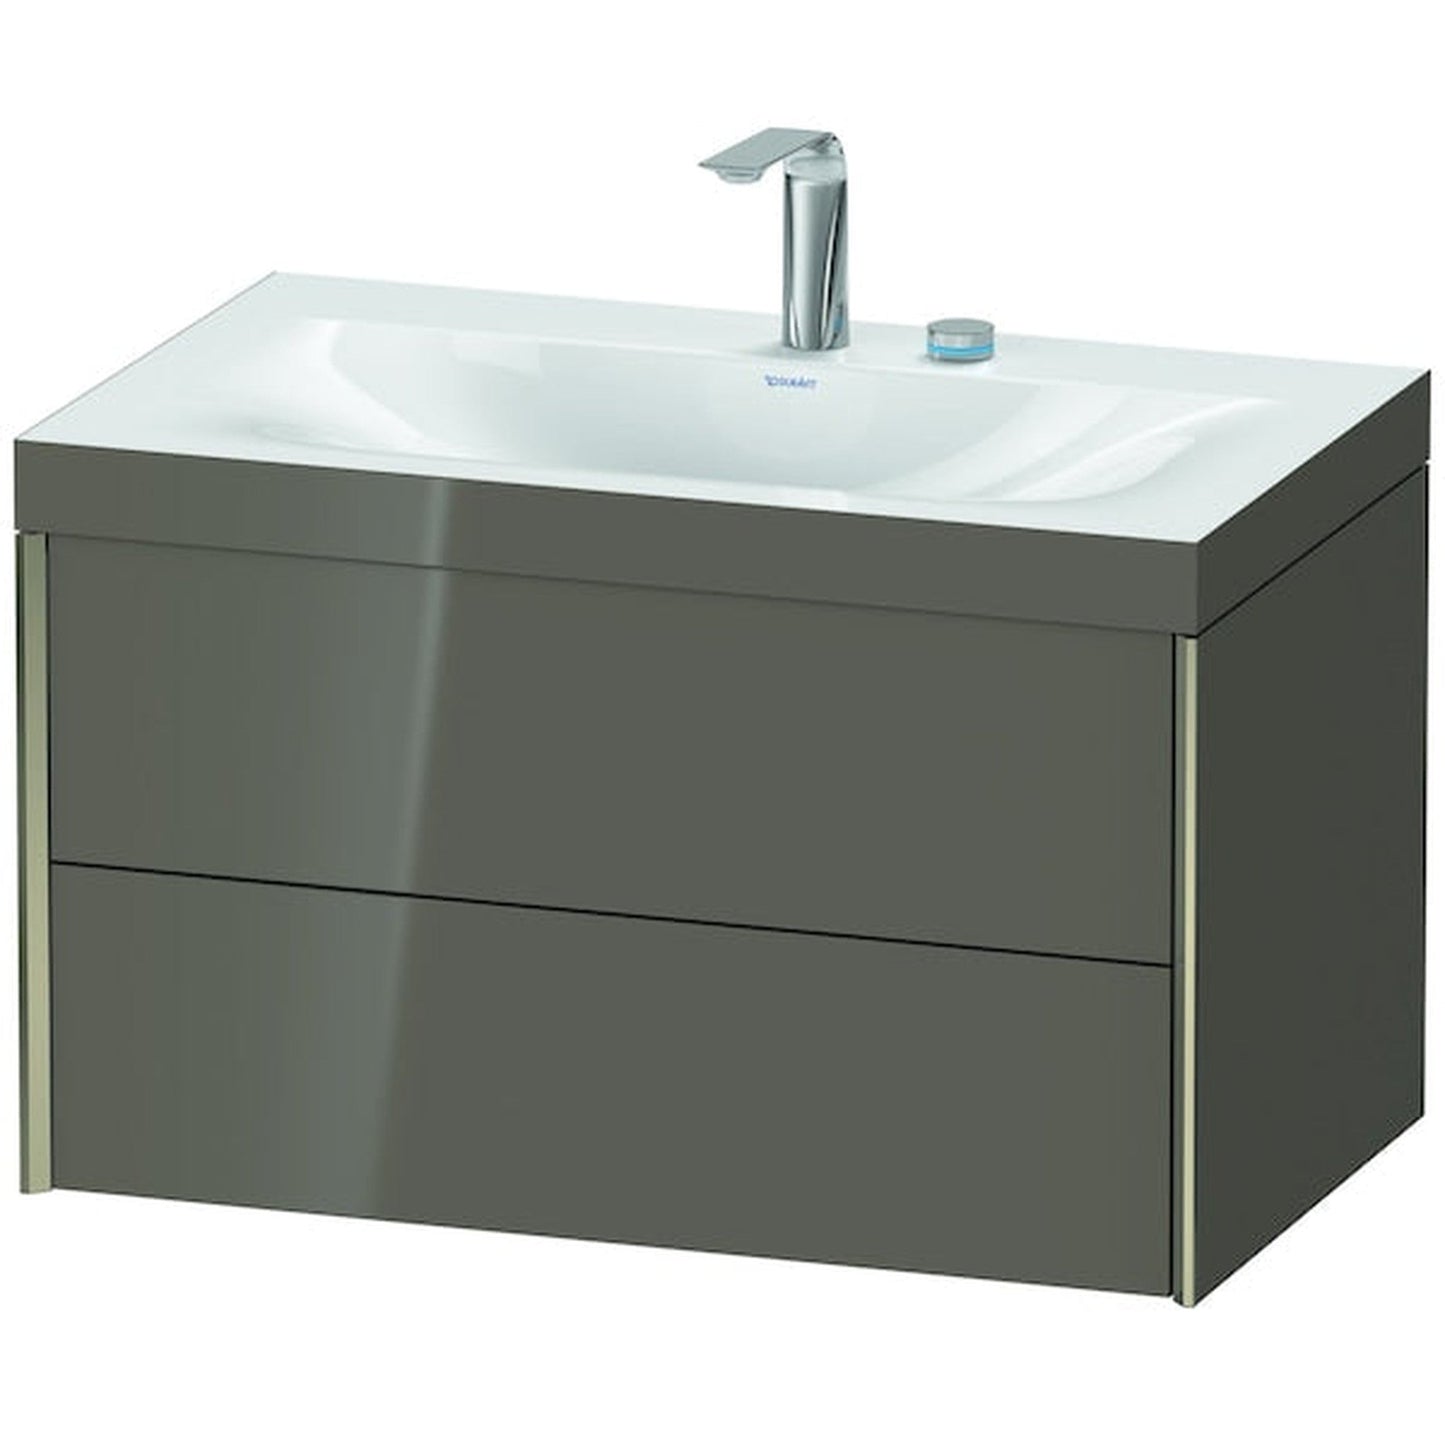 Duravit Xviu 31" x 20" x 19" Two Drawer C-Bonded Wall-Mount Vanity Kit With Two Tap Holes, Flannel Gray (XV4615EB189C)